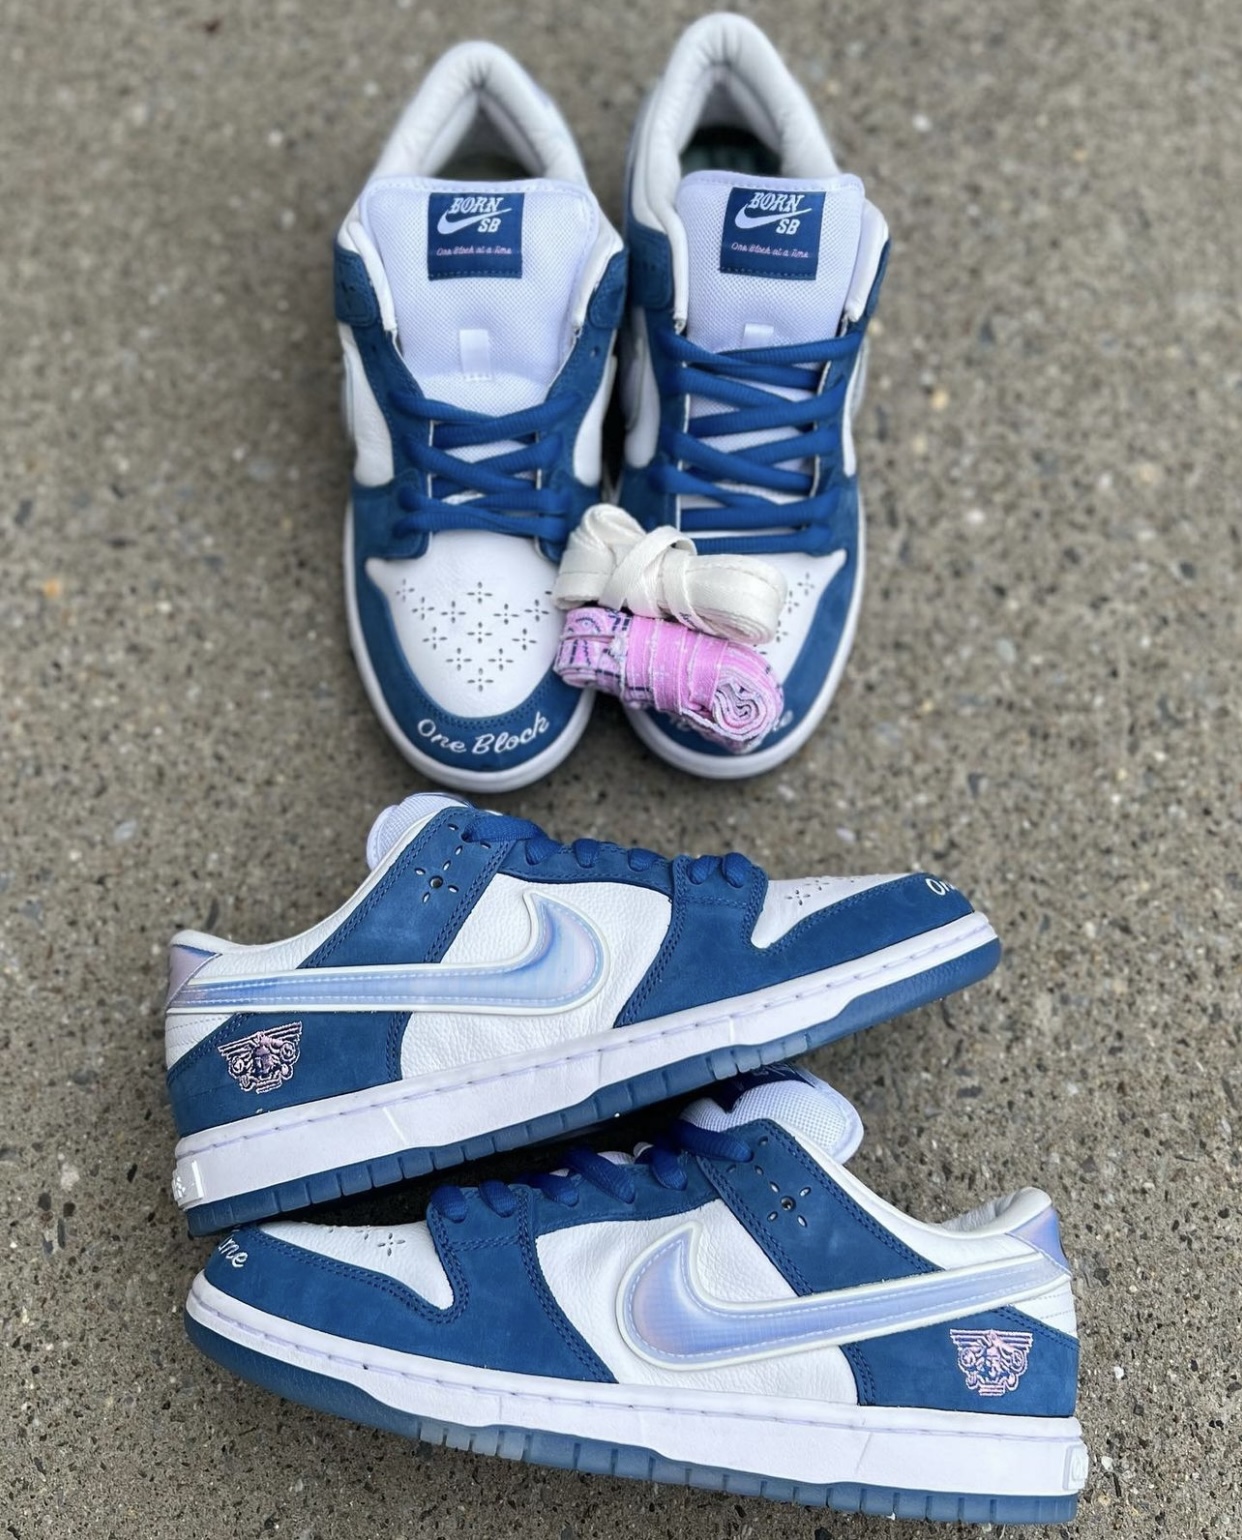 Born x Raised Nike SB Dunk Low Release Date Where to Buy